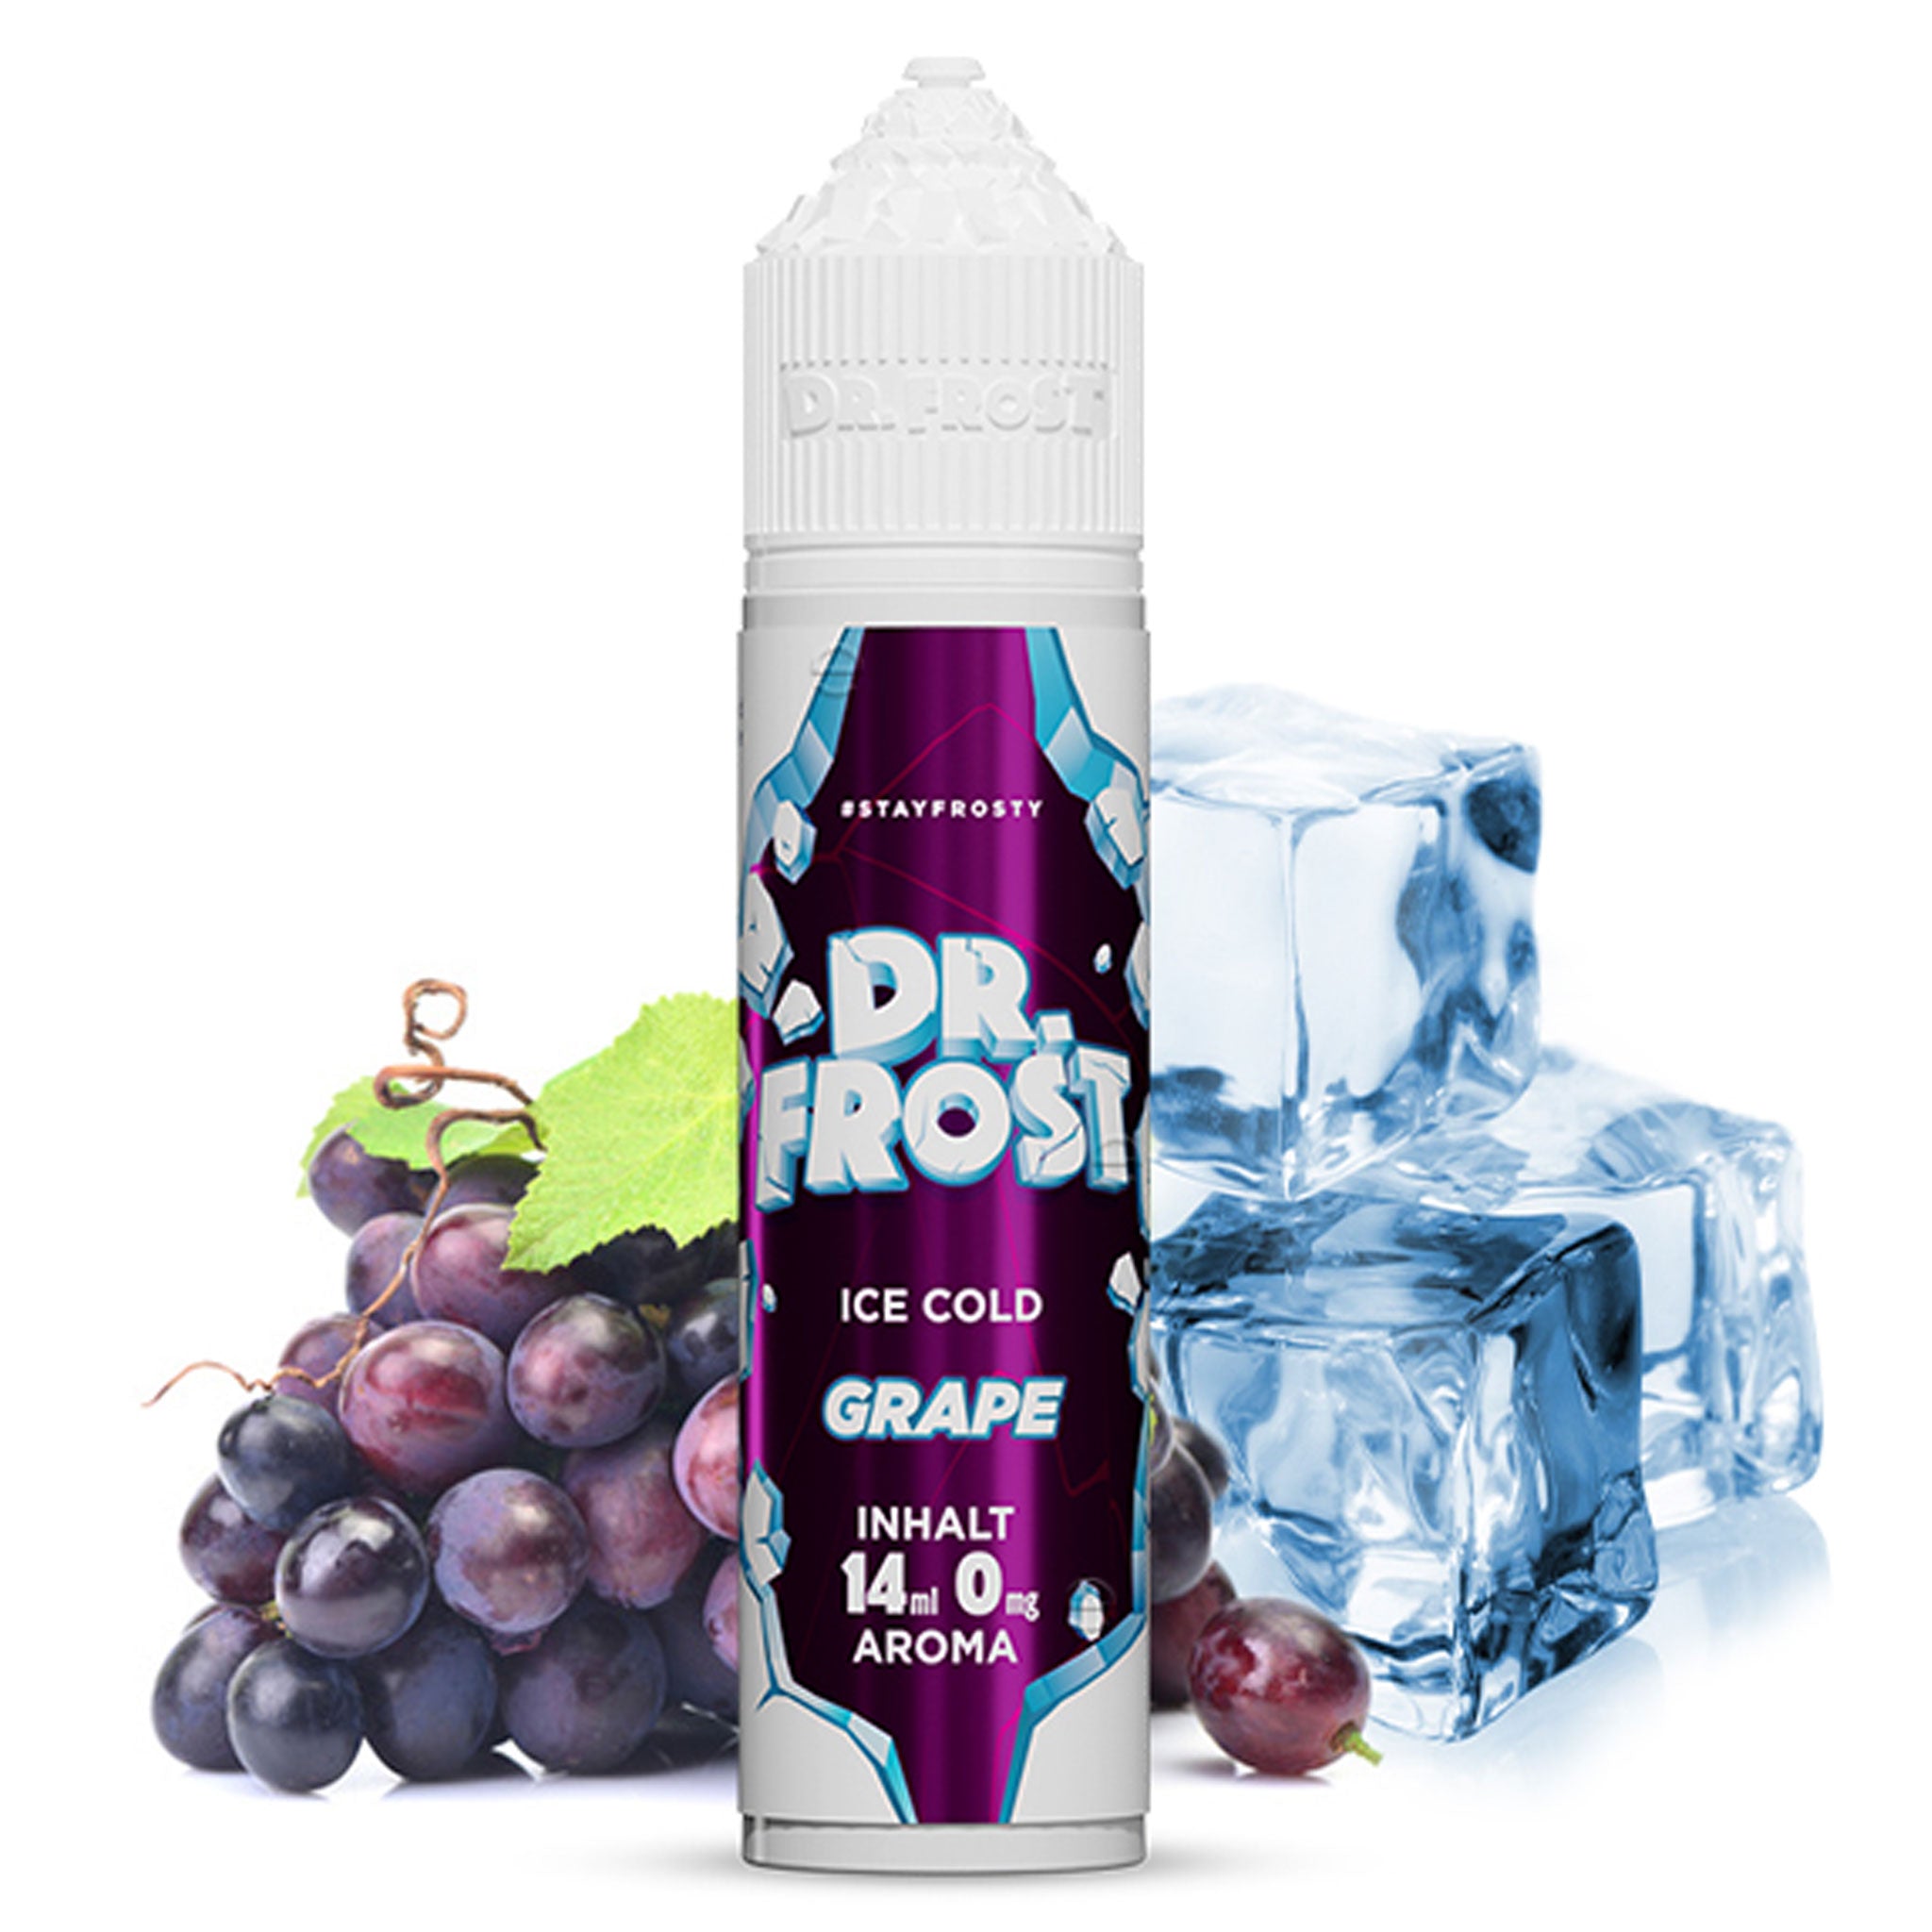 Dr. Frost - Ice Cold - Grape - Longfill Aroma 14 ml